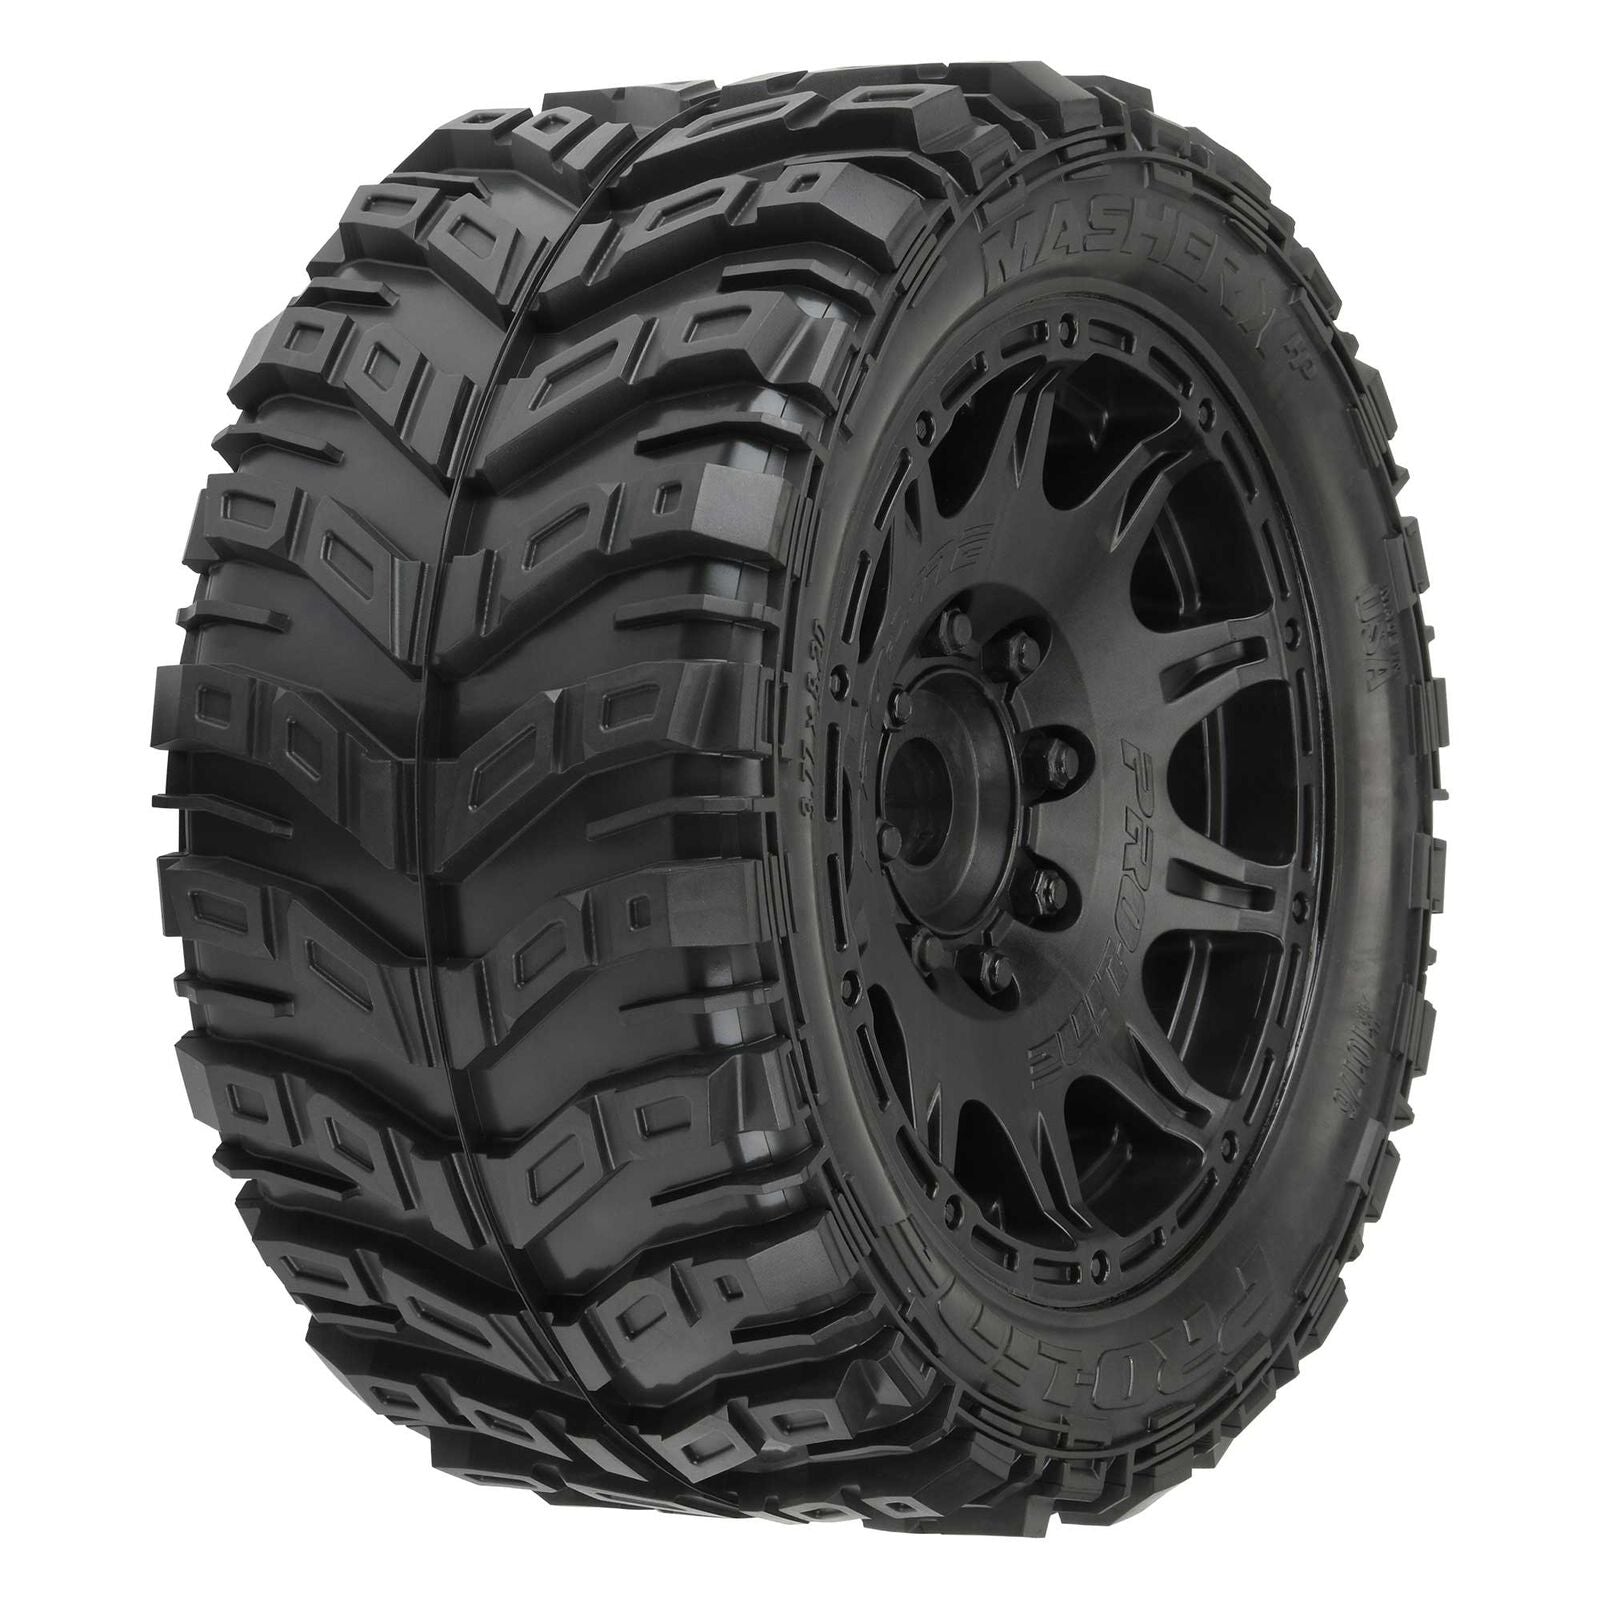 Pro-Line 1/6 Masher X HP BELTED F/R 5.7" MT Tires Mounted 24mm Raid (2)